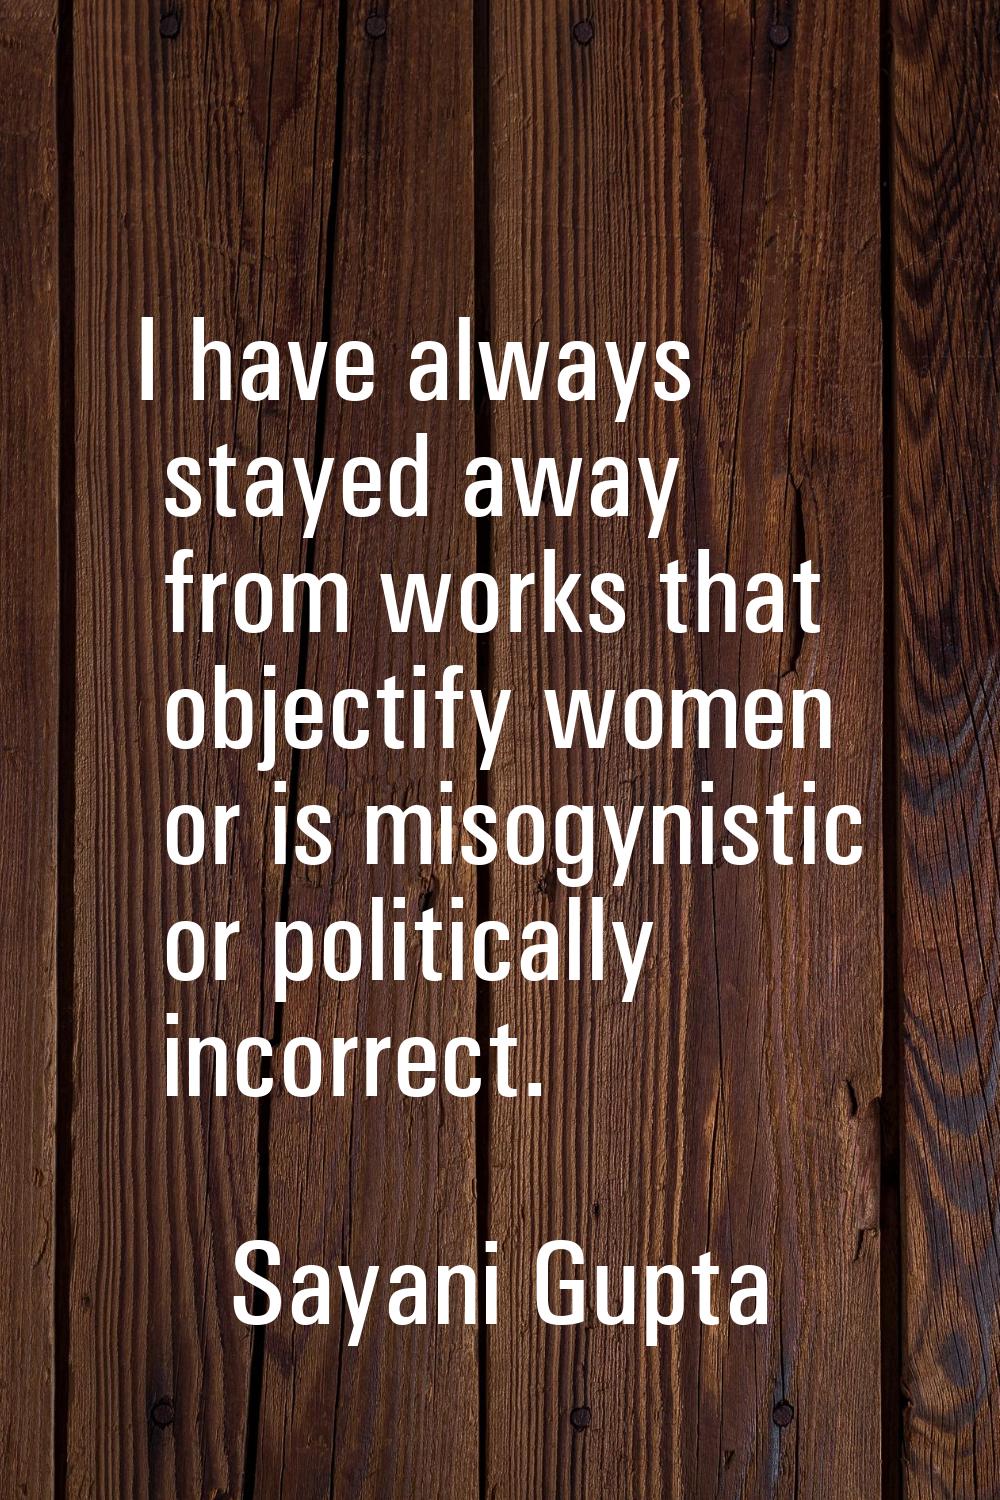 I have always stayed away from works that objectify women or is misogynistic or politically incorre